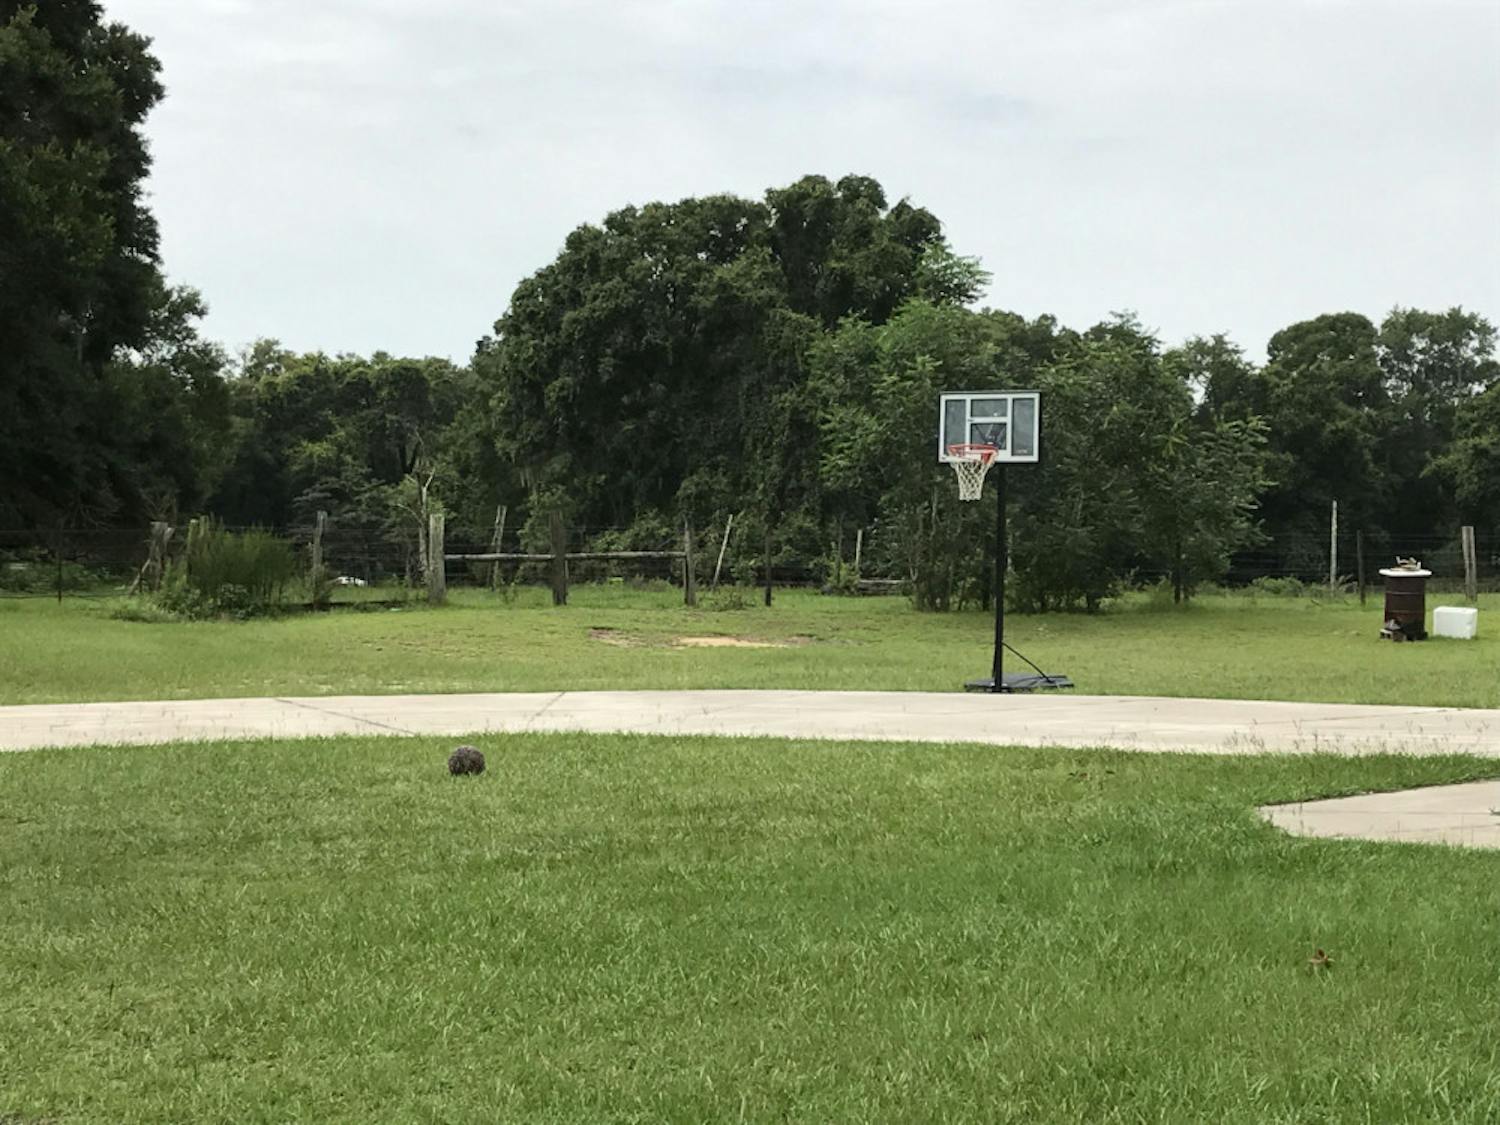 The basketball court in the family’s yard isn’t used much anymore. But relatives and friends come over and play sometimes, so a ball and hoop remain.